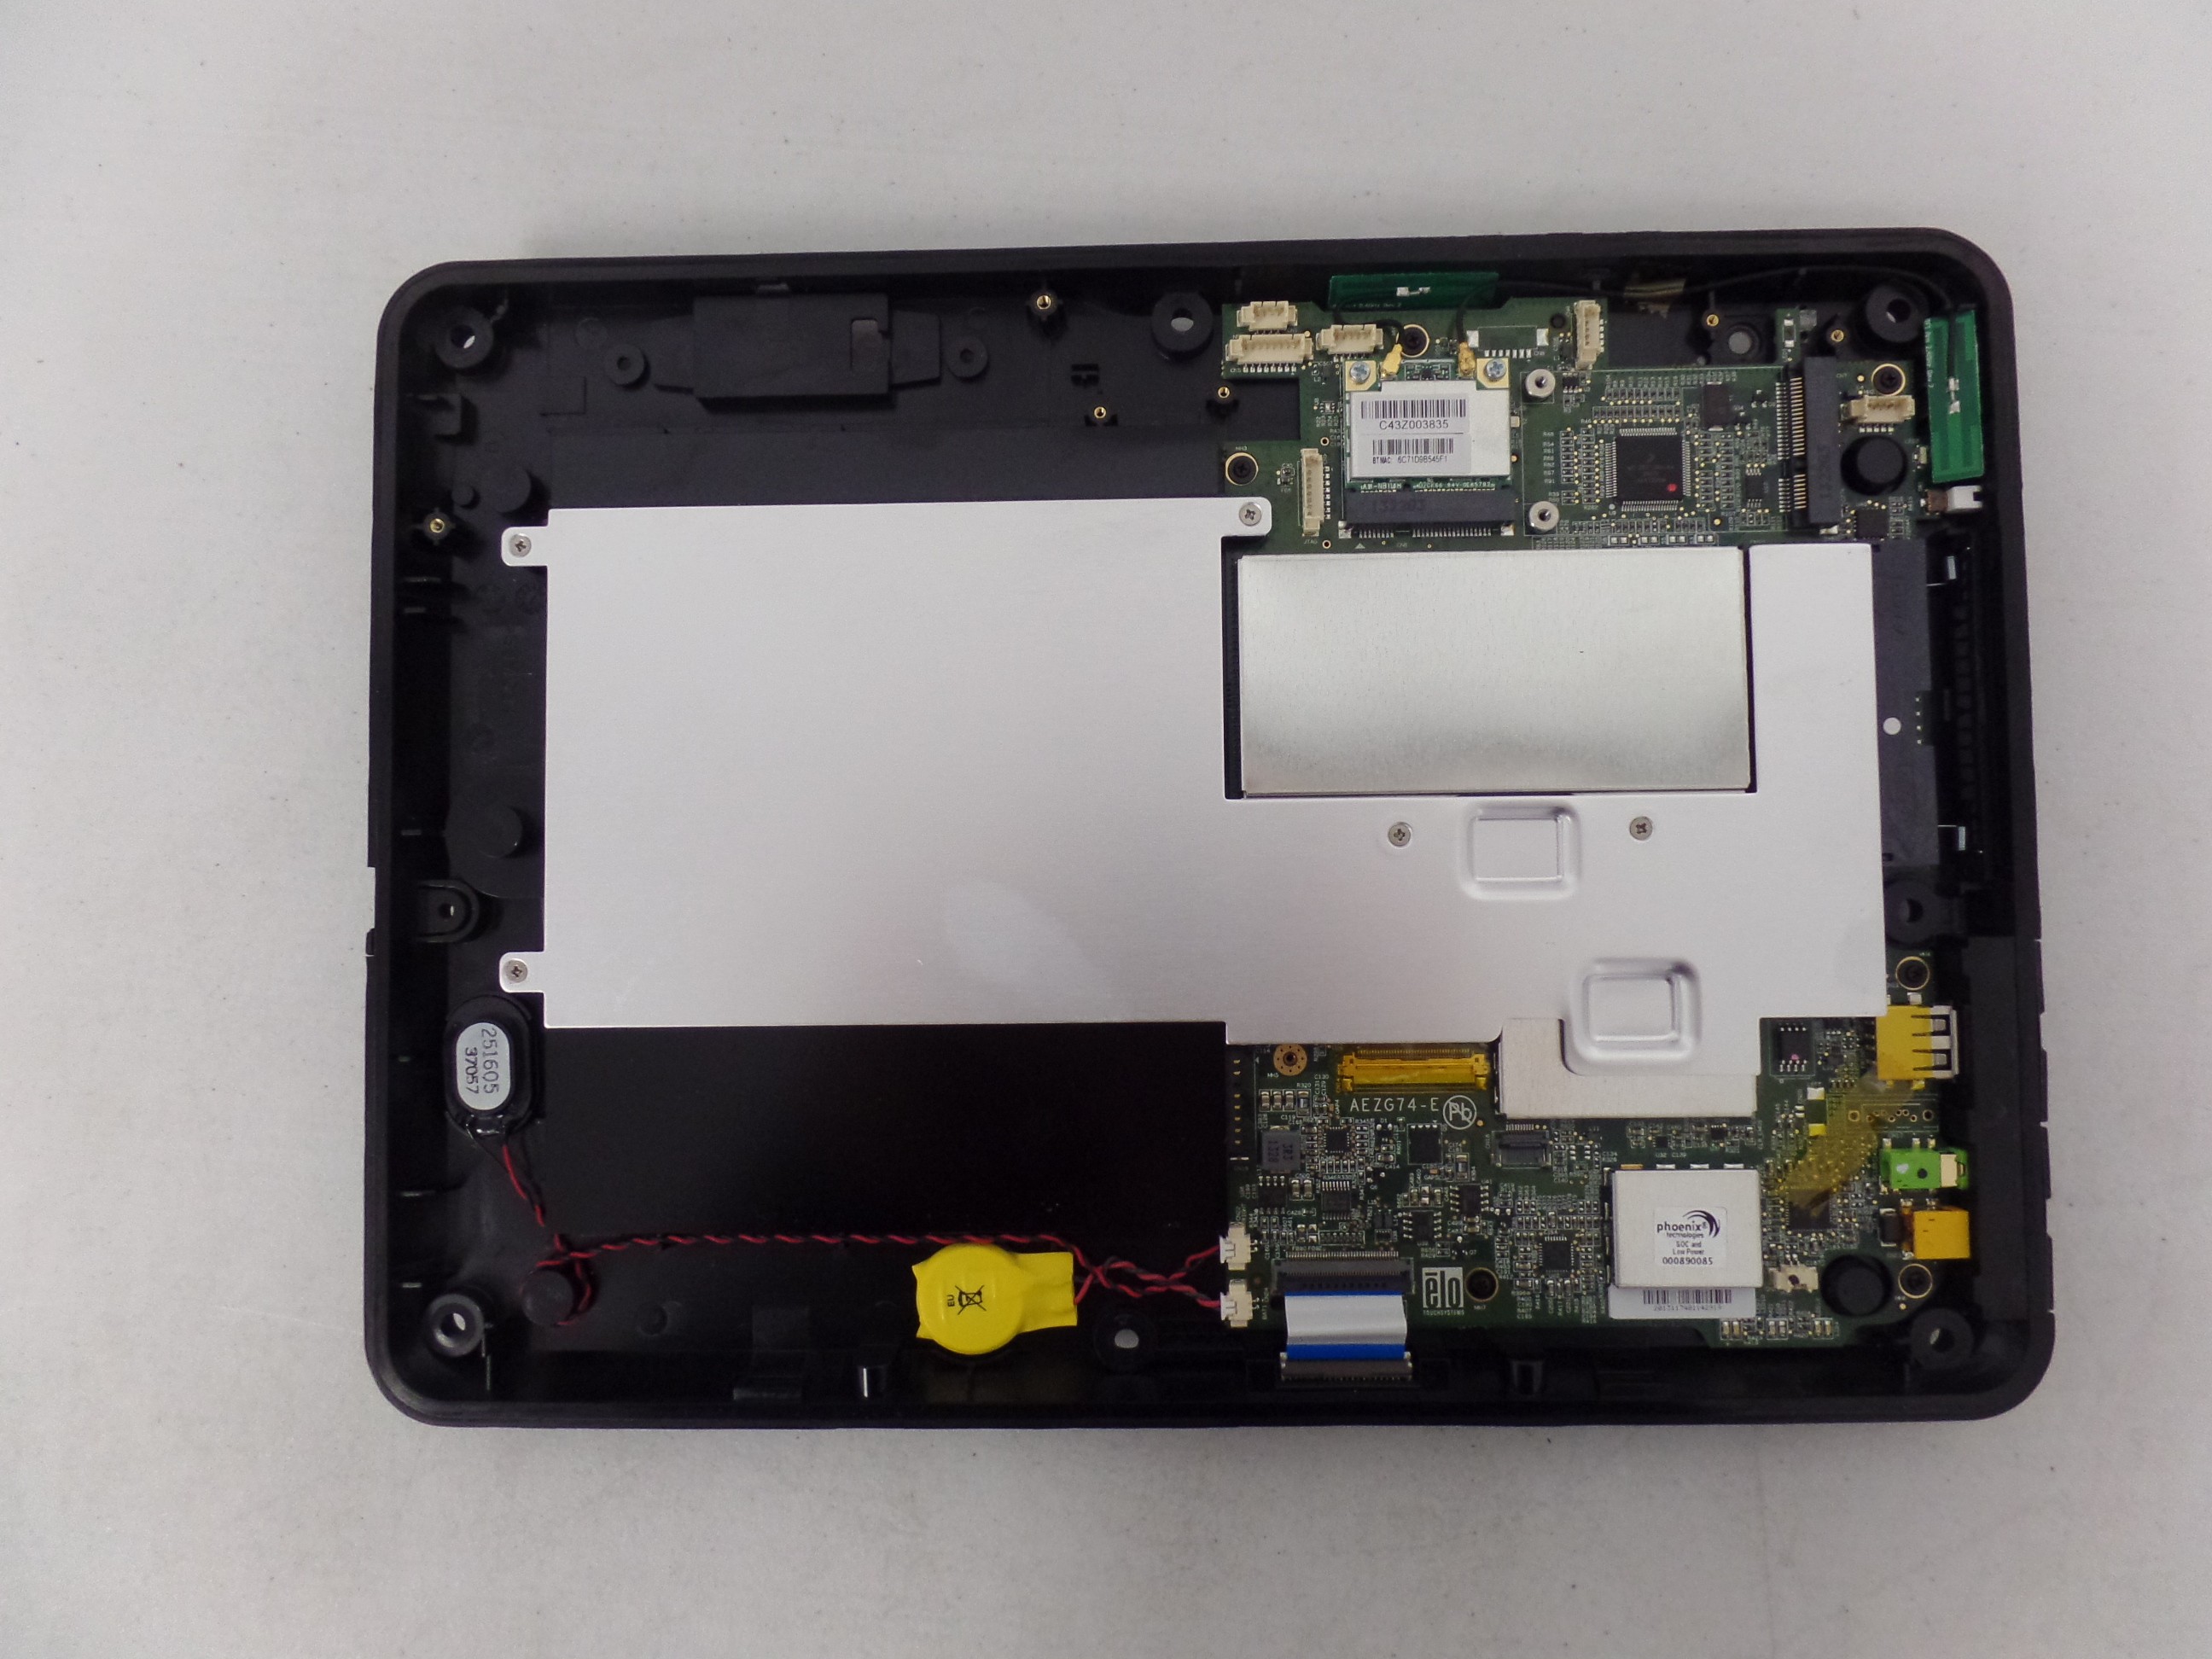 Original Motherboard and Back Panel cover for Elo Touch E806980 10.1" Tablet 